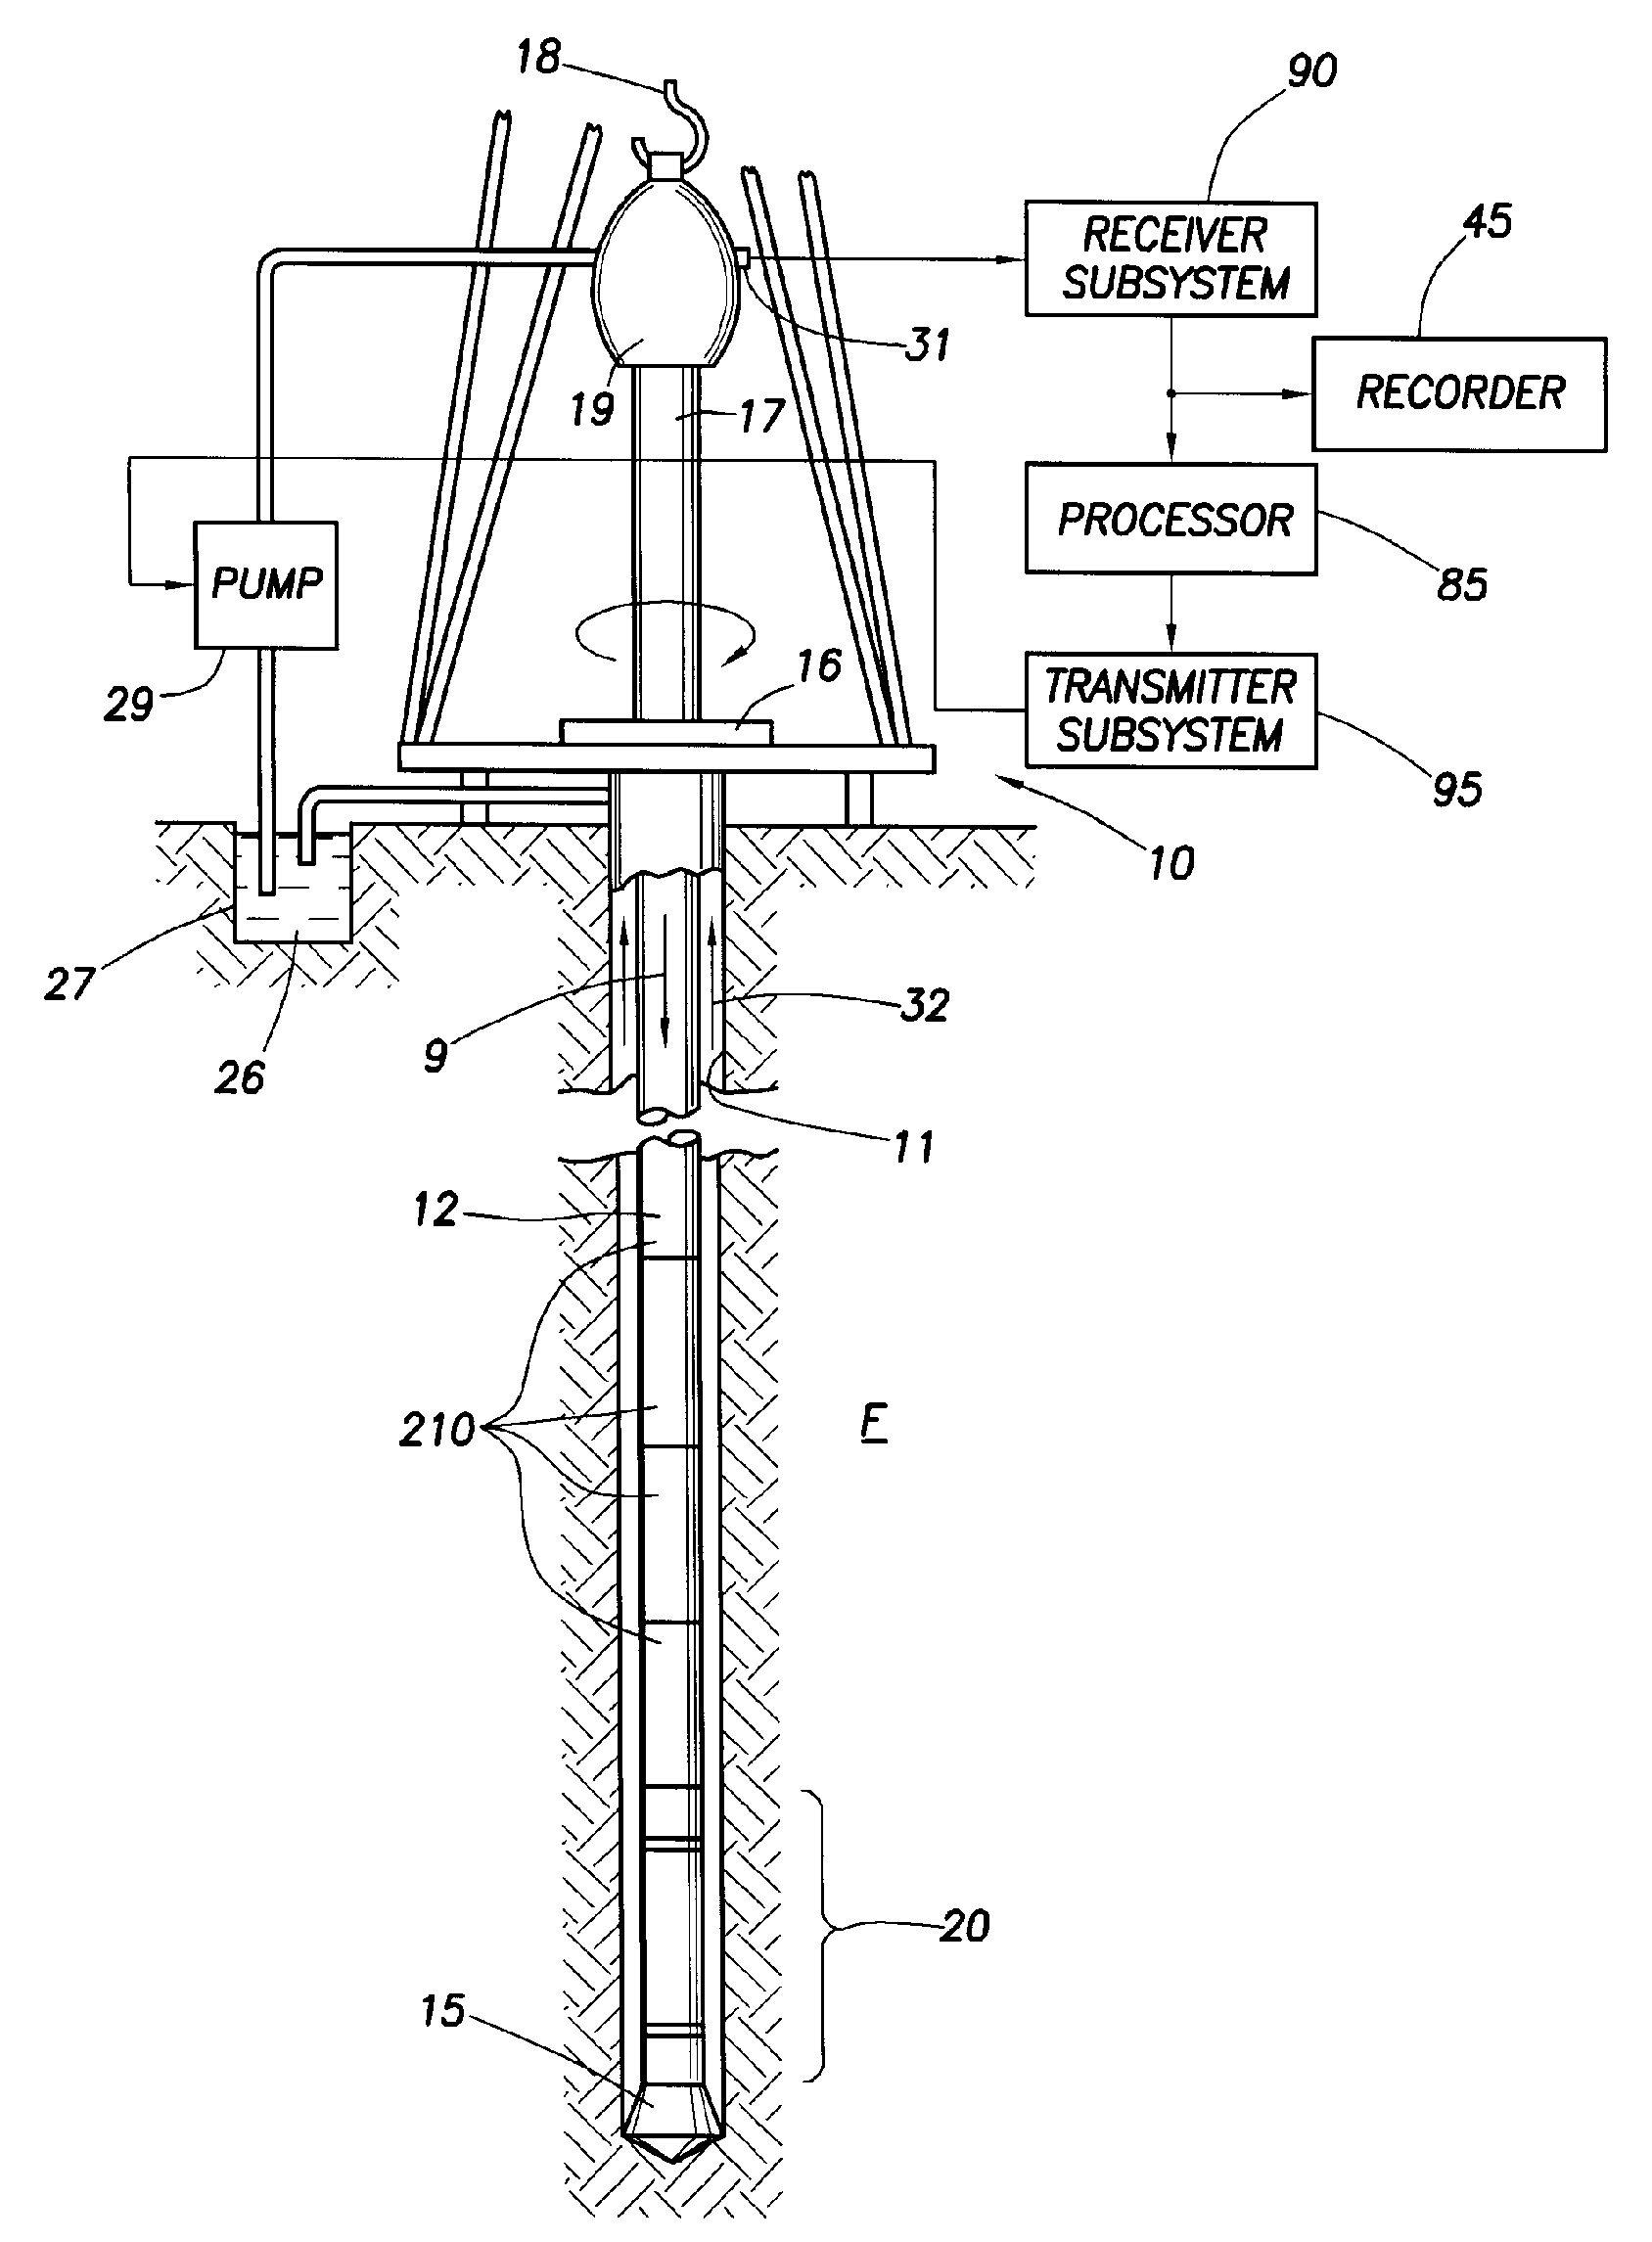 Method and conduit for transmitting signals